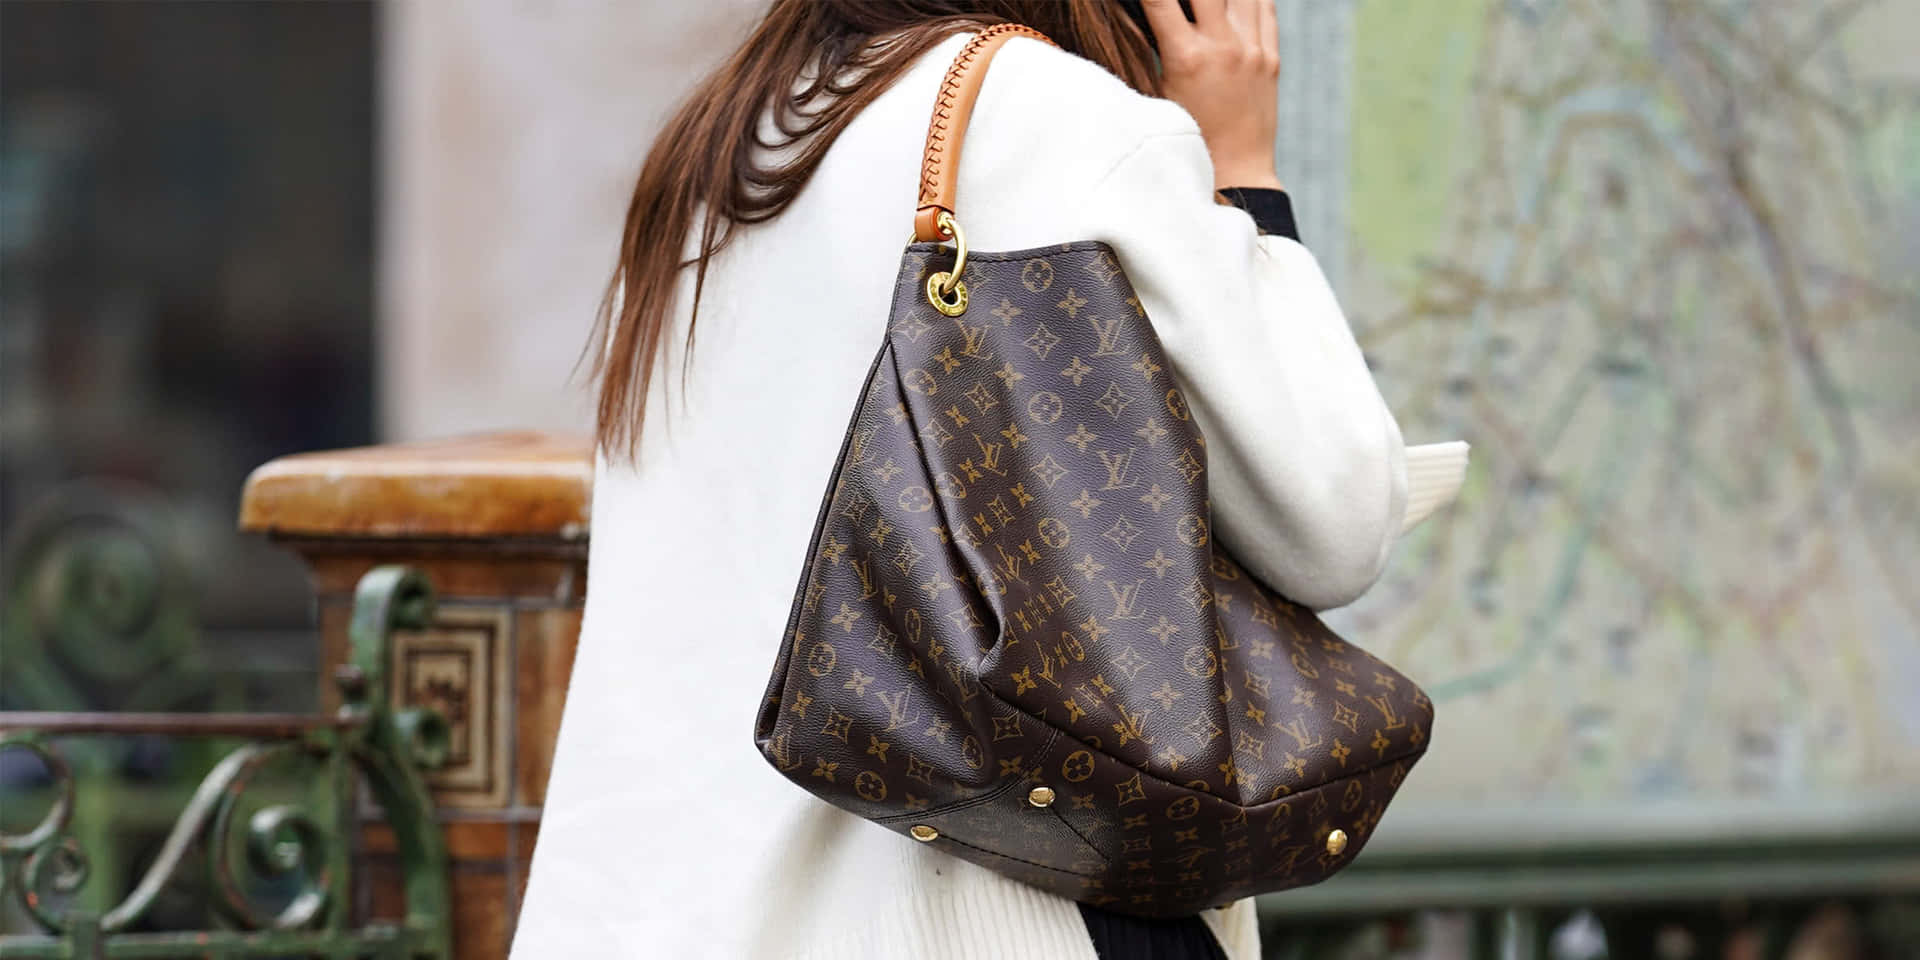 Louis Vuitton Monogram Camouflage Neverfull MM Tote Bag